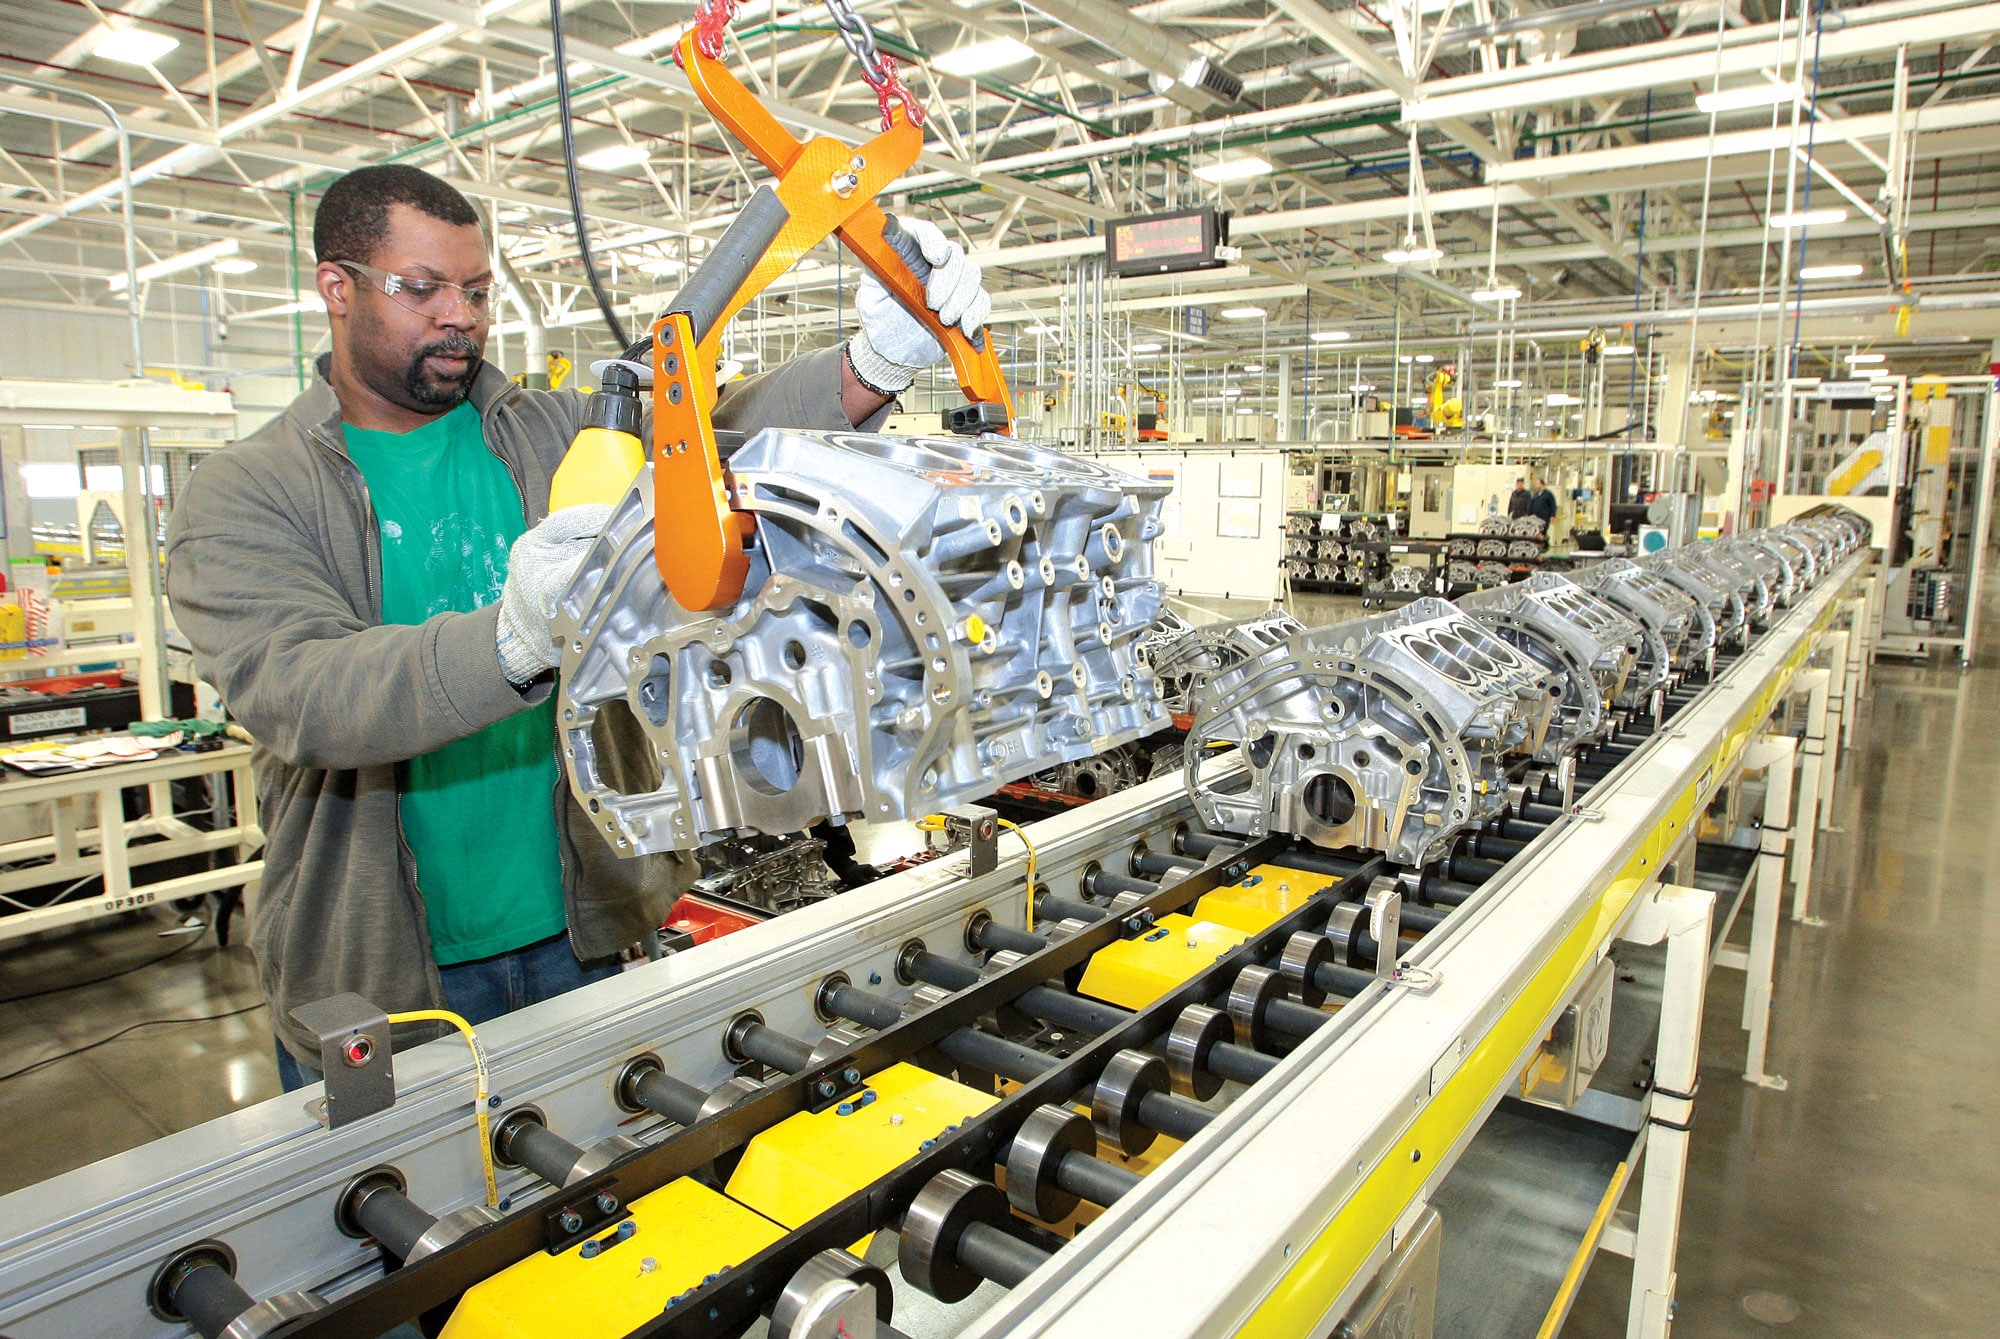 Green Manufacturing Goes Beyond Energy at Fiat Chrysler Automobiles